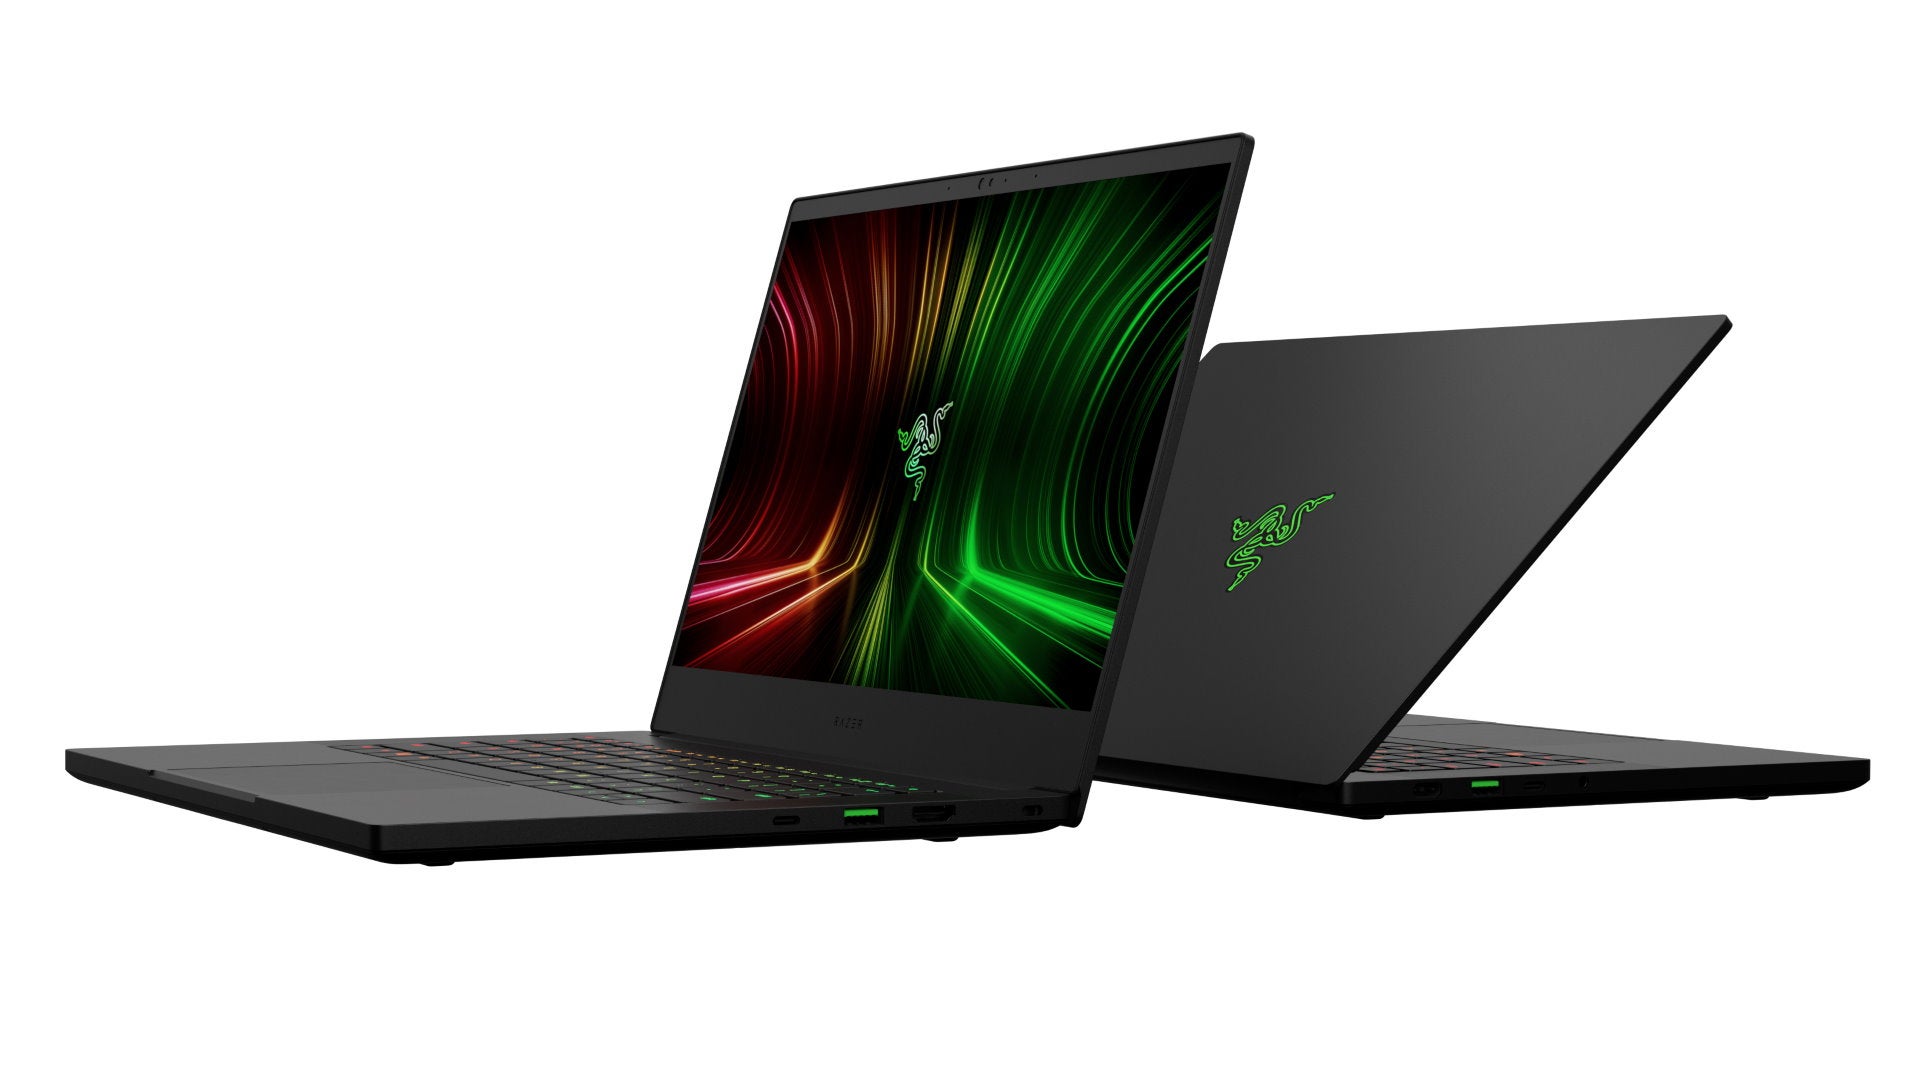 A render of Razer's Blade 14 gaming laptop from the front and back